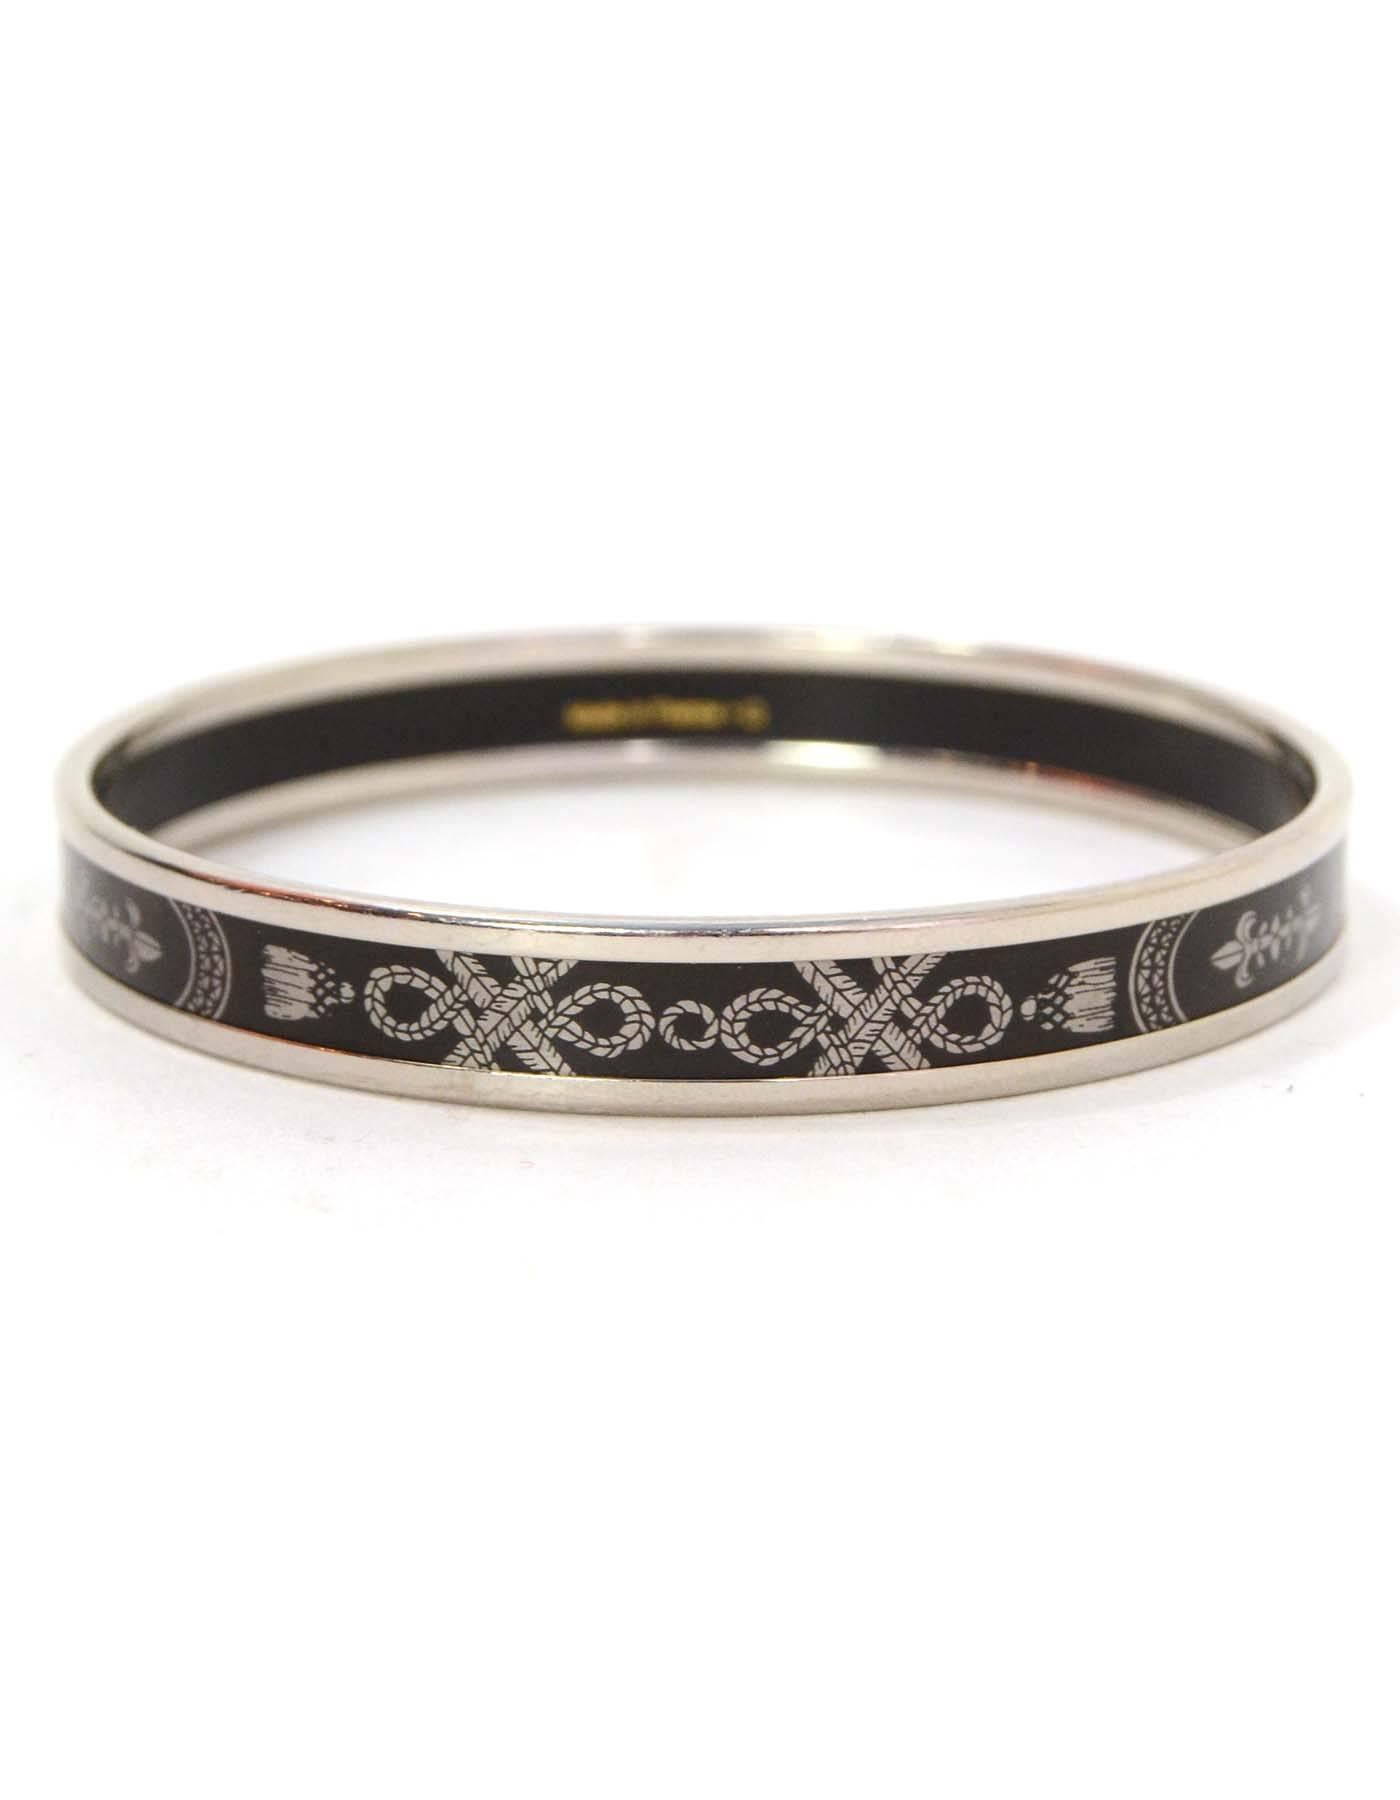 Hermes Black and Palladium Narrow Enamel Bracelet Sz 65
Features rope deisgn throughout

Made In: France
Color: Black and palladium
Materials: Metal and enamel
Closure: None
Stamp: Hermes Paris Made in France + Q
Retail Price: $510 +